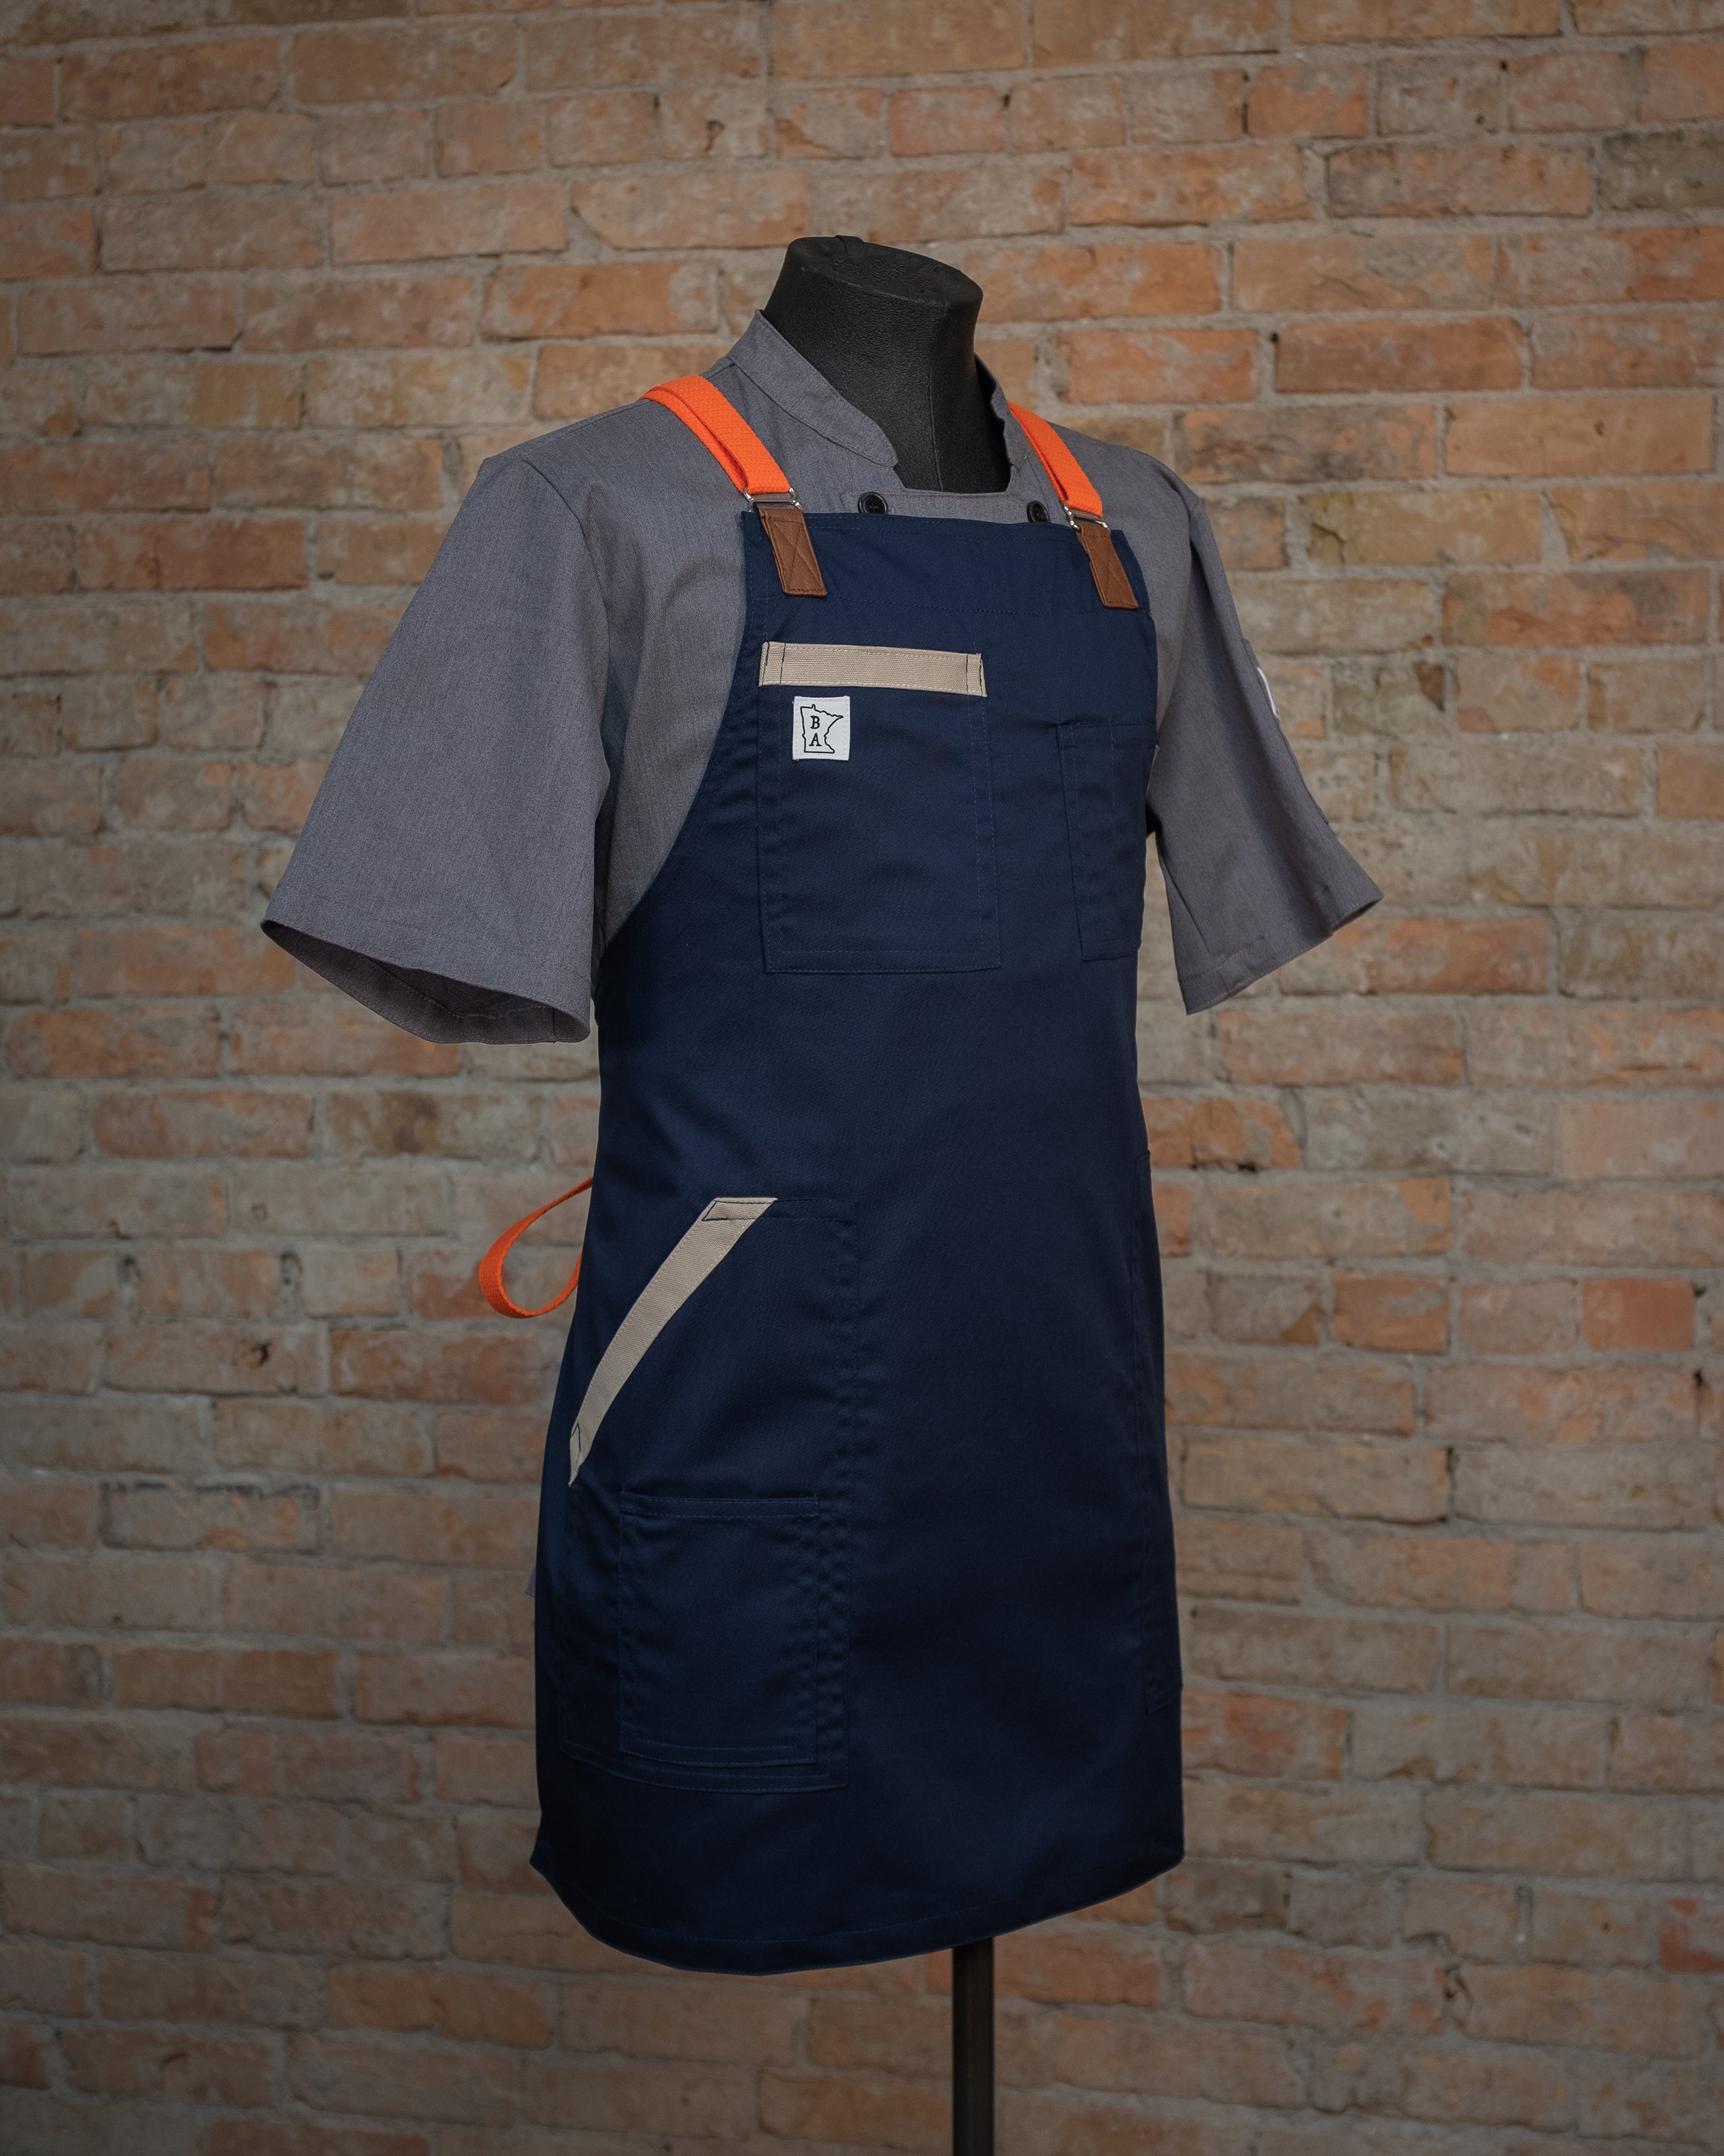 The blended fabric apron design 'Bert', displayed on a mannequin over a gray chef coat. Both the chef coat and apron were designed and produced by Craftmade Aprons in Minnesota.